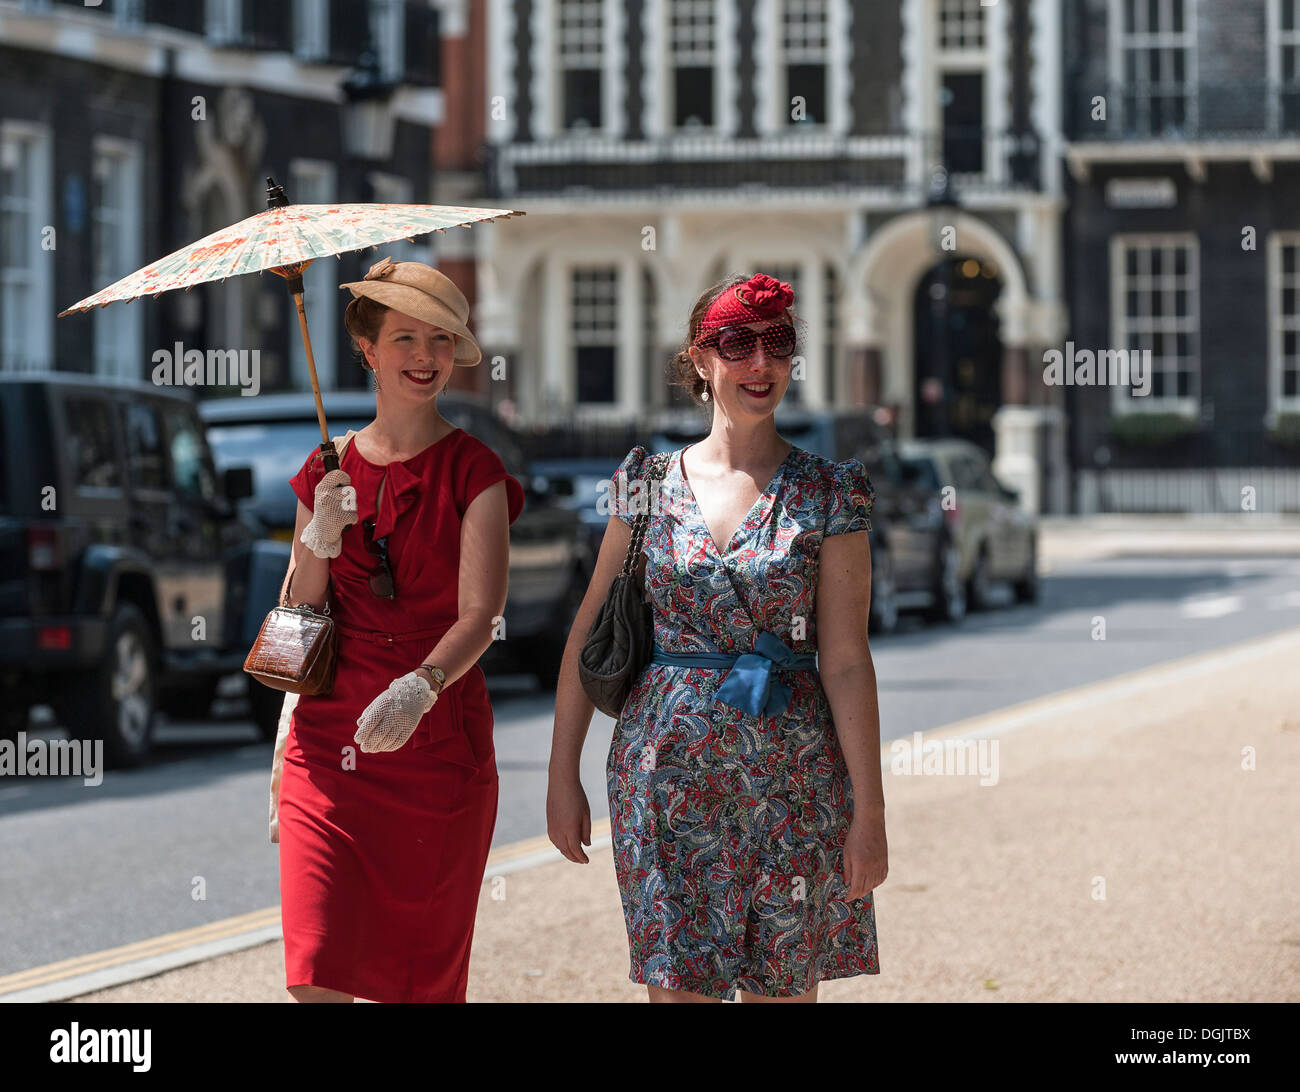 Two ladies in vintage style clothing walking in Bedford Square. Stock Photo